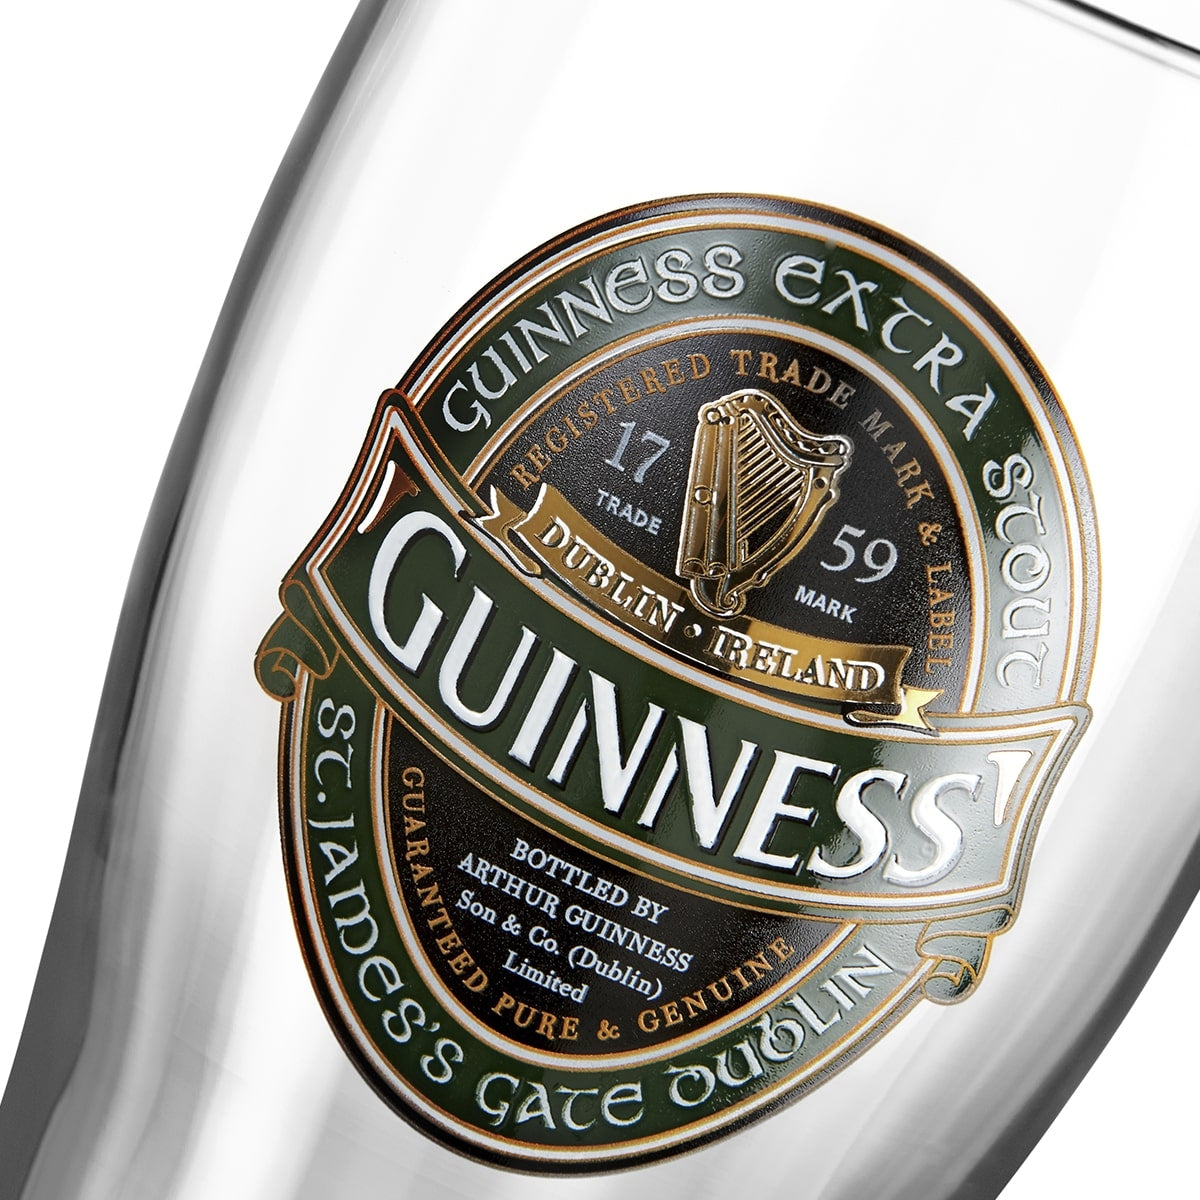 An Guinness Ireland Collection pint glass with the iconic Guinness label.